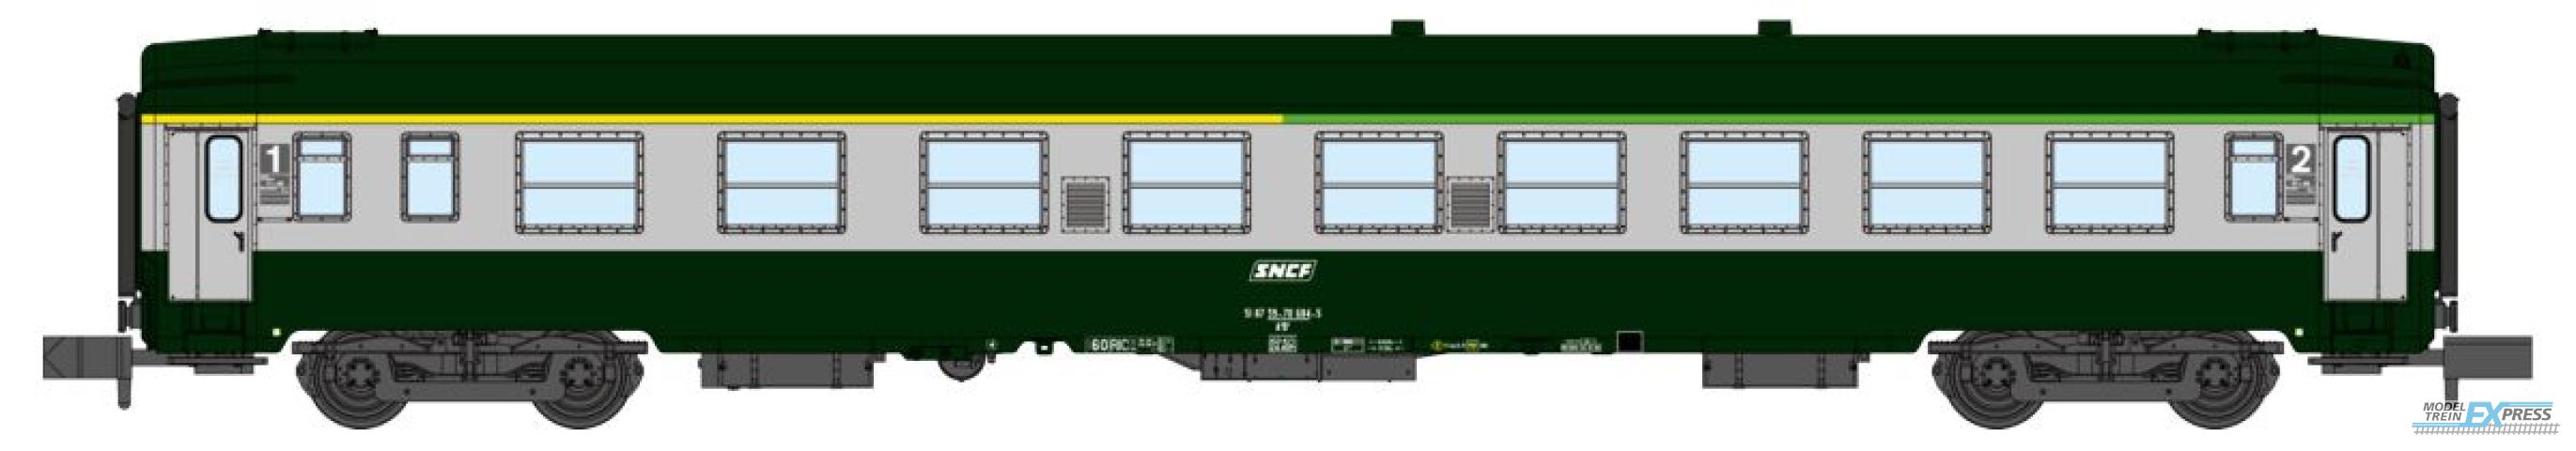 REE models NW-262 UIC Y coach, A4B5 ex-A9 green/concrete grey  livery ,boxed SNCF Logo, Period V